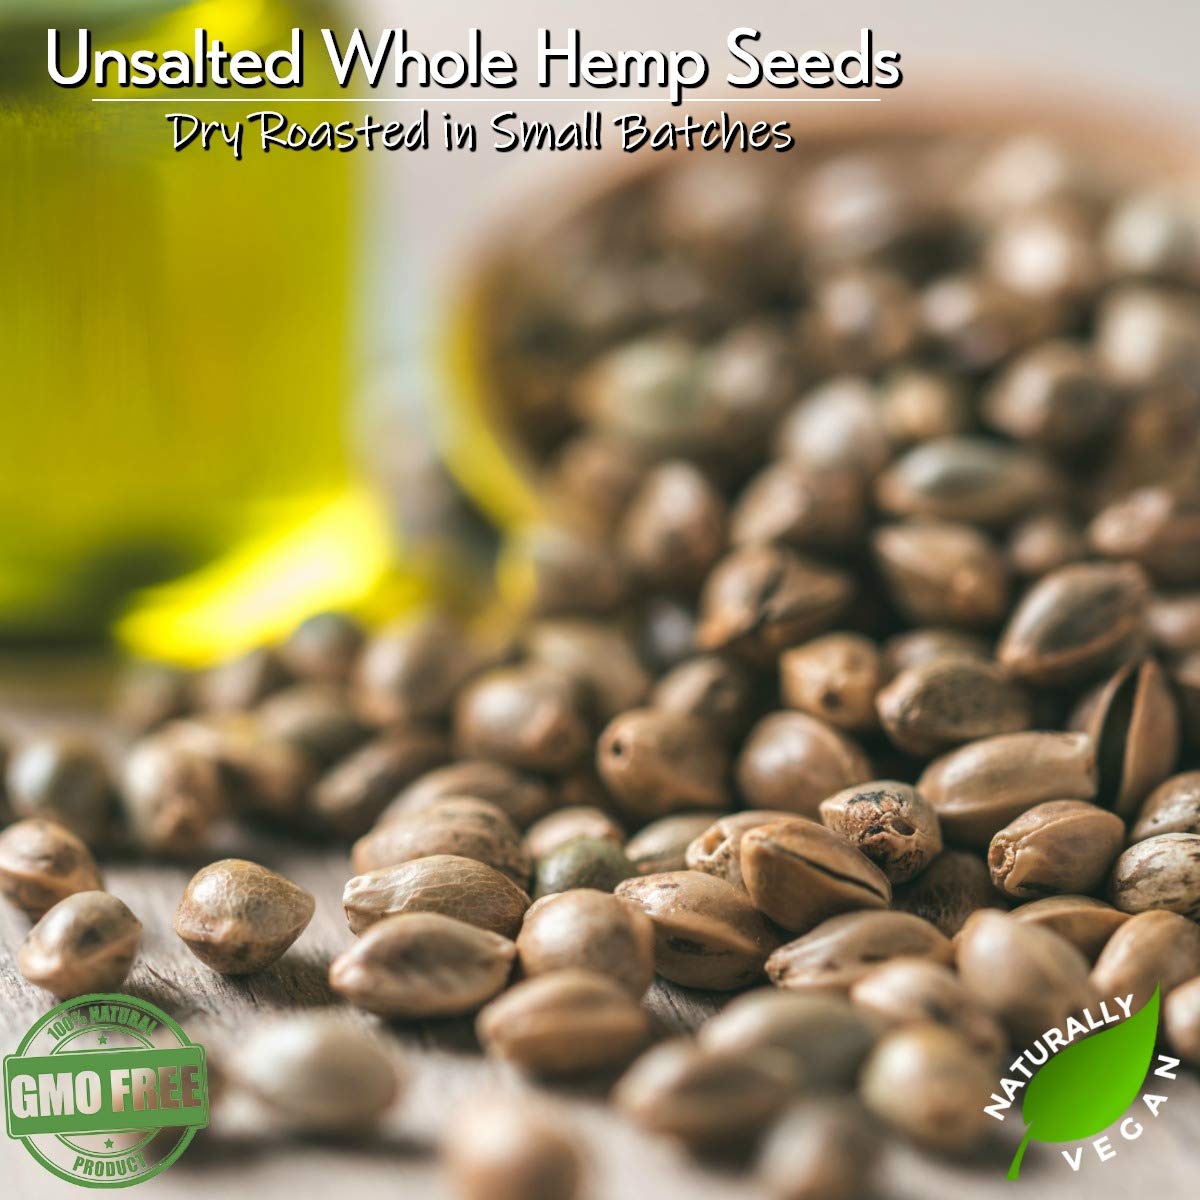 GERBS Roasted Unsalted Whole Hemp Seeds 4 LBS. Premium Grade | Dry Roasted & Packaged in Resealable Bulk Bag |THC Free, Keto & Paleo |High in Magnesium, Protein & Fiber| Gluten Peanut Tree Nut Free : Grocery & Gourmet Food